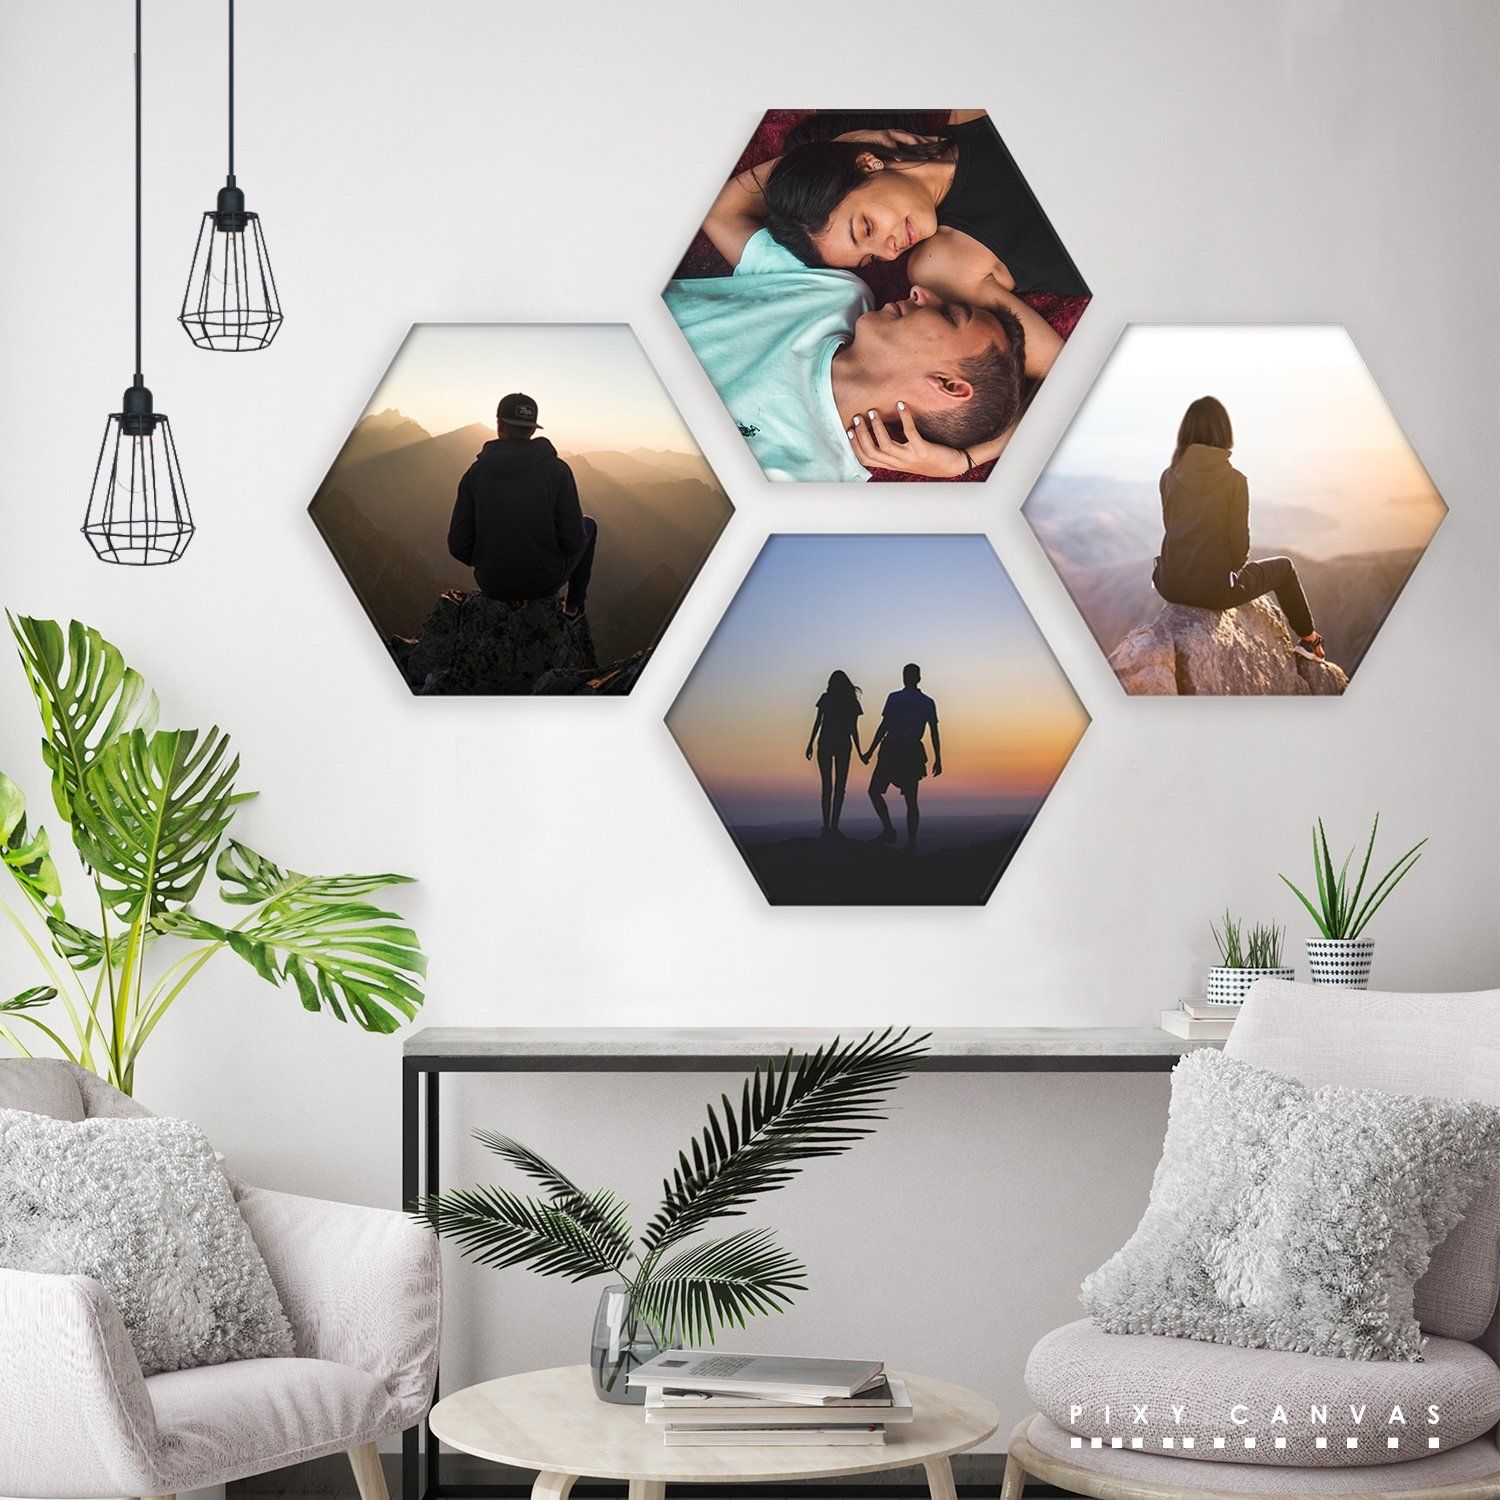 creative wall pictures ideas geometric shapes